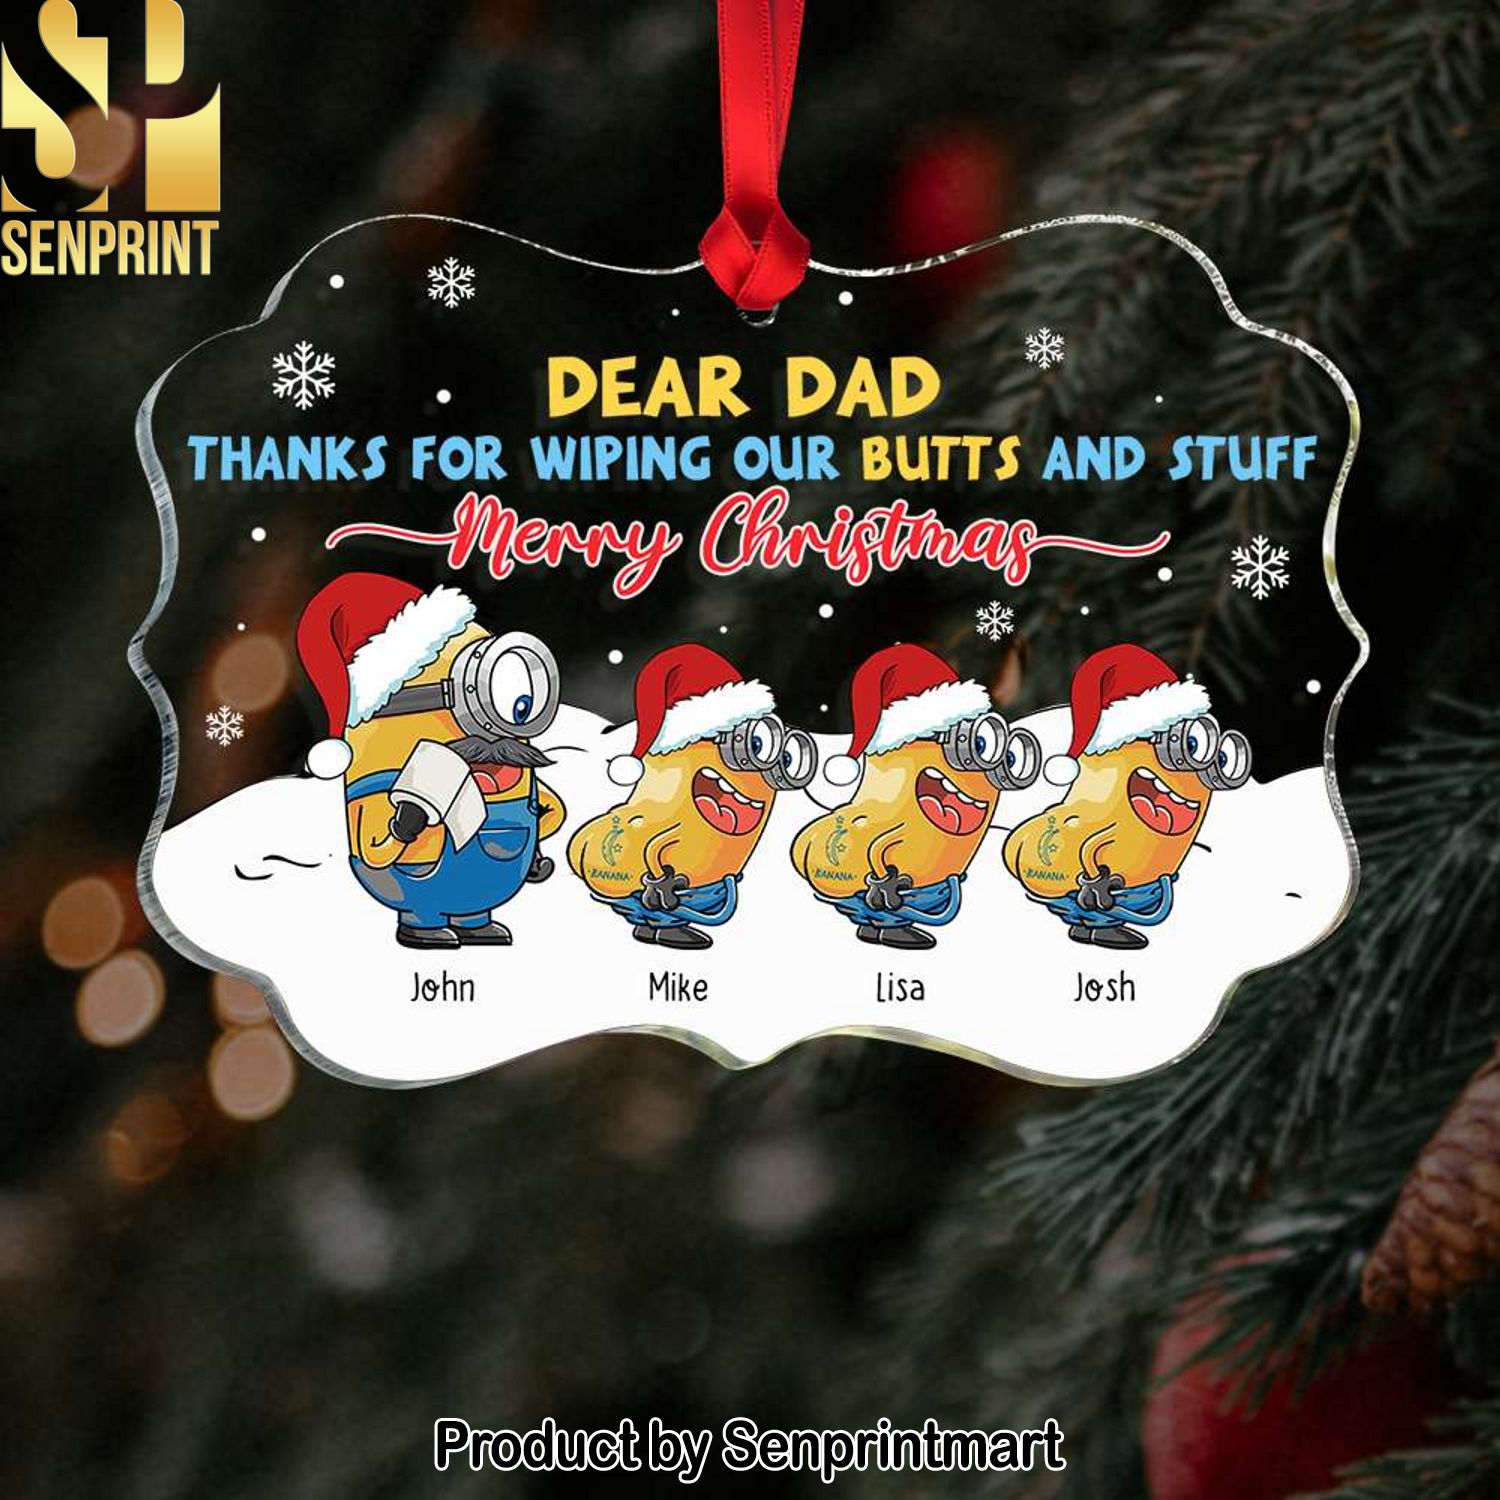 Dear Dad, Gift For Dad, Personalized Ornament, Wiping Butt Kid Ornament, Christmas Gift